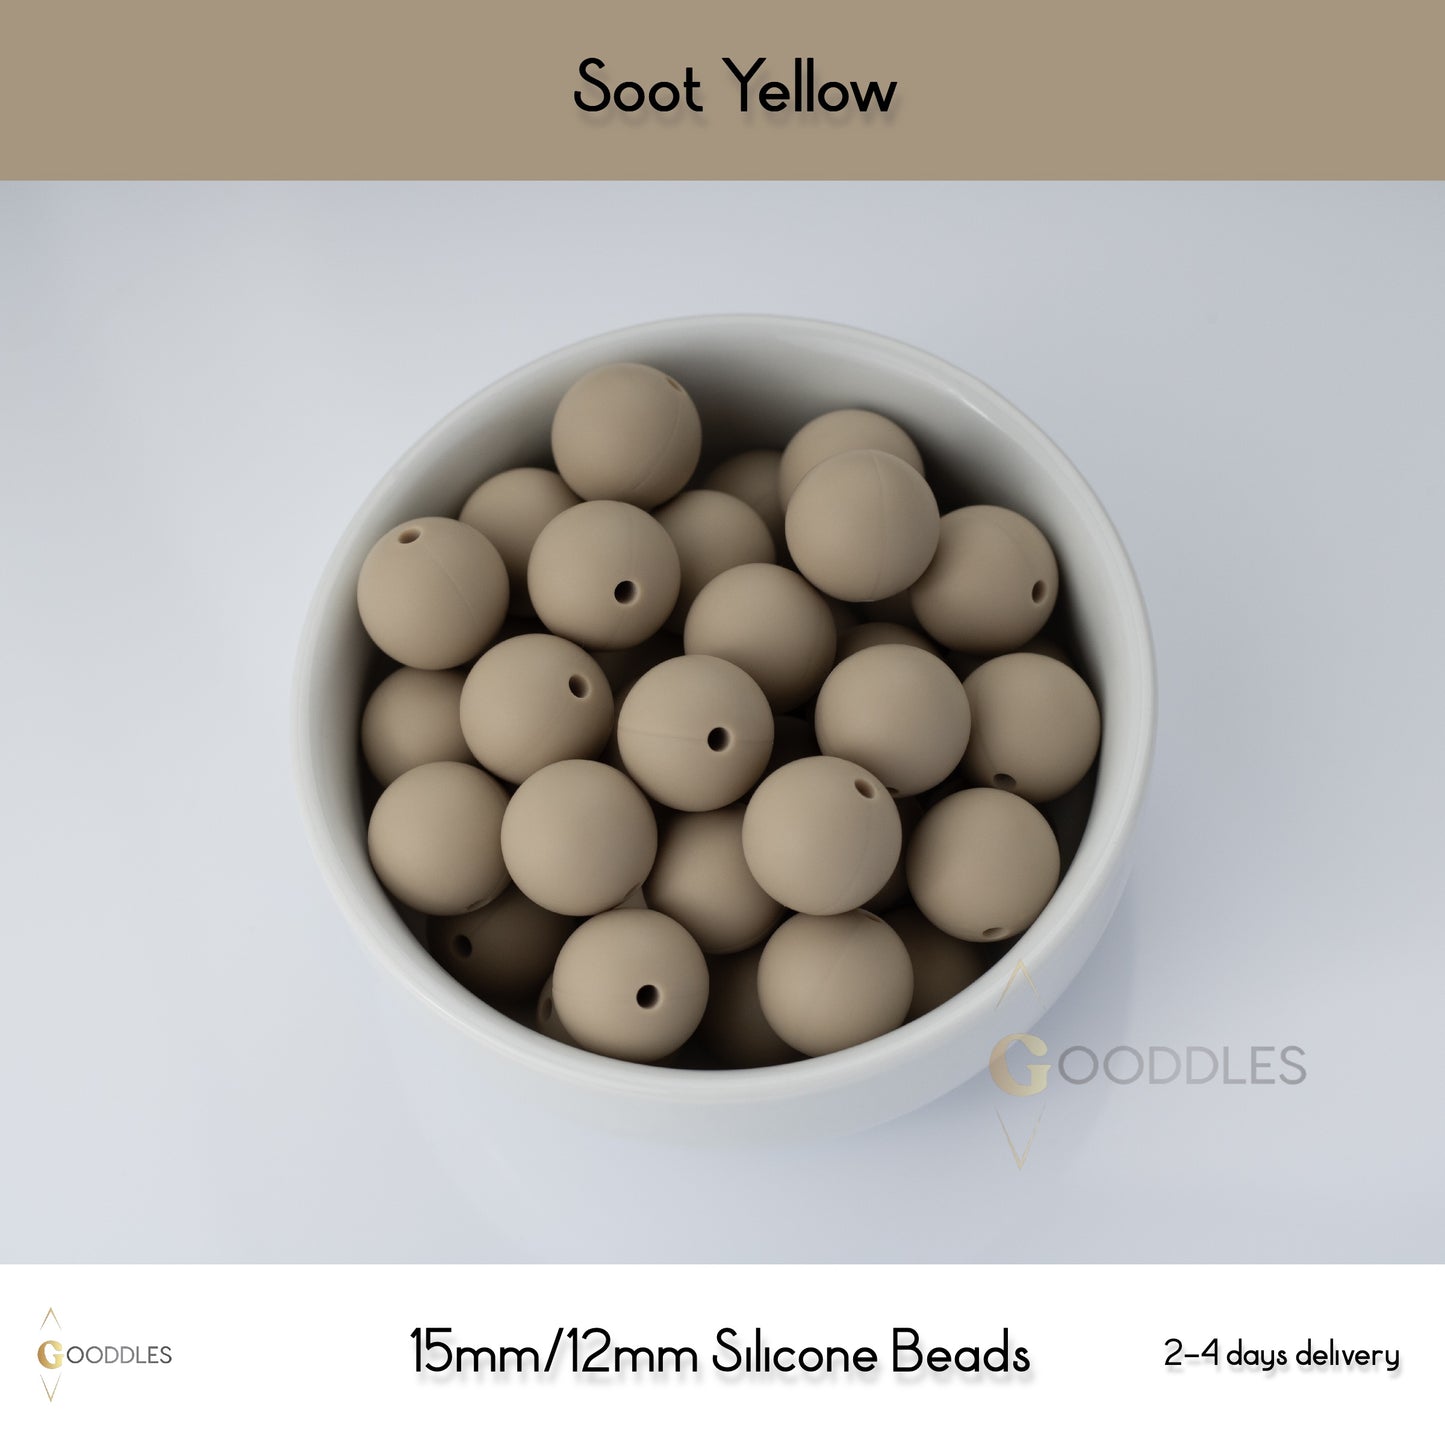 5pcs, Soot Yellow Silicone Beads Round Silicone Beads